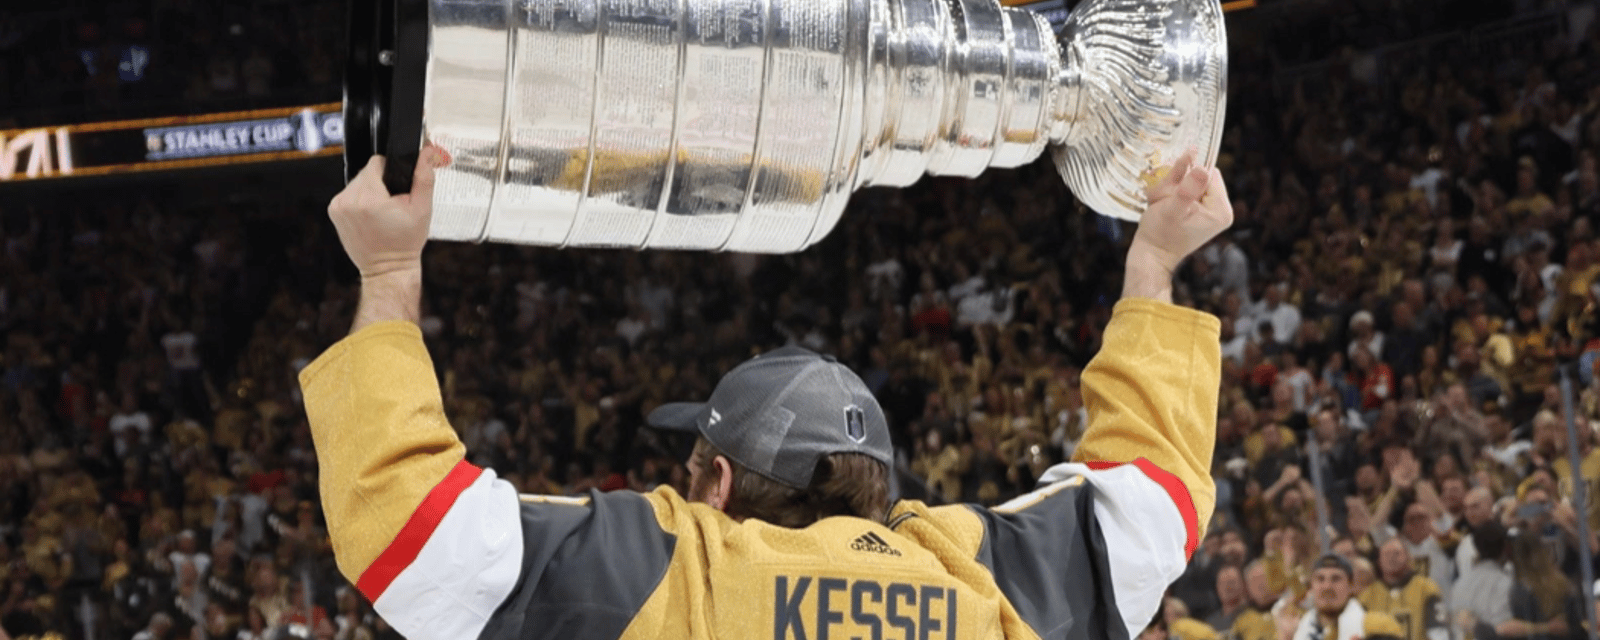 Phil Kessel brings the Stanley Cup back to Toronto 